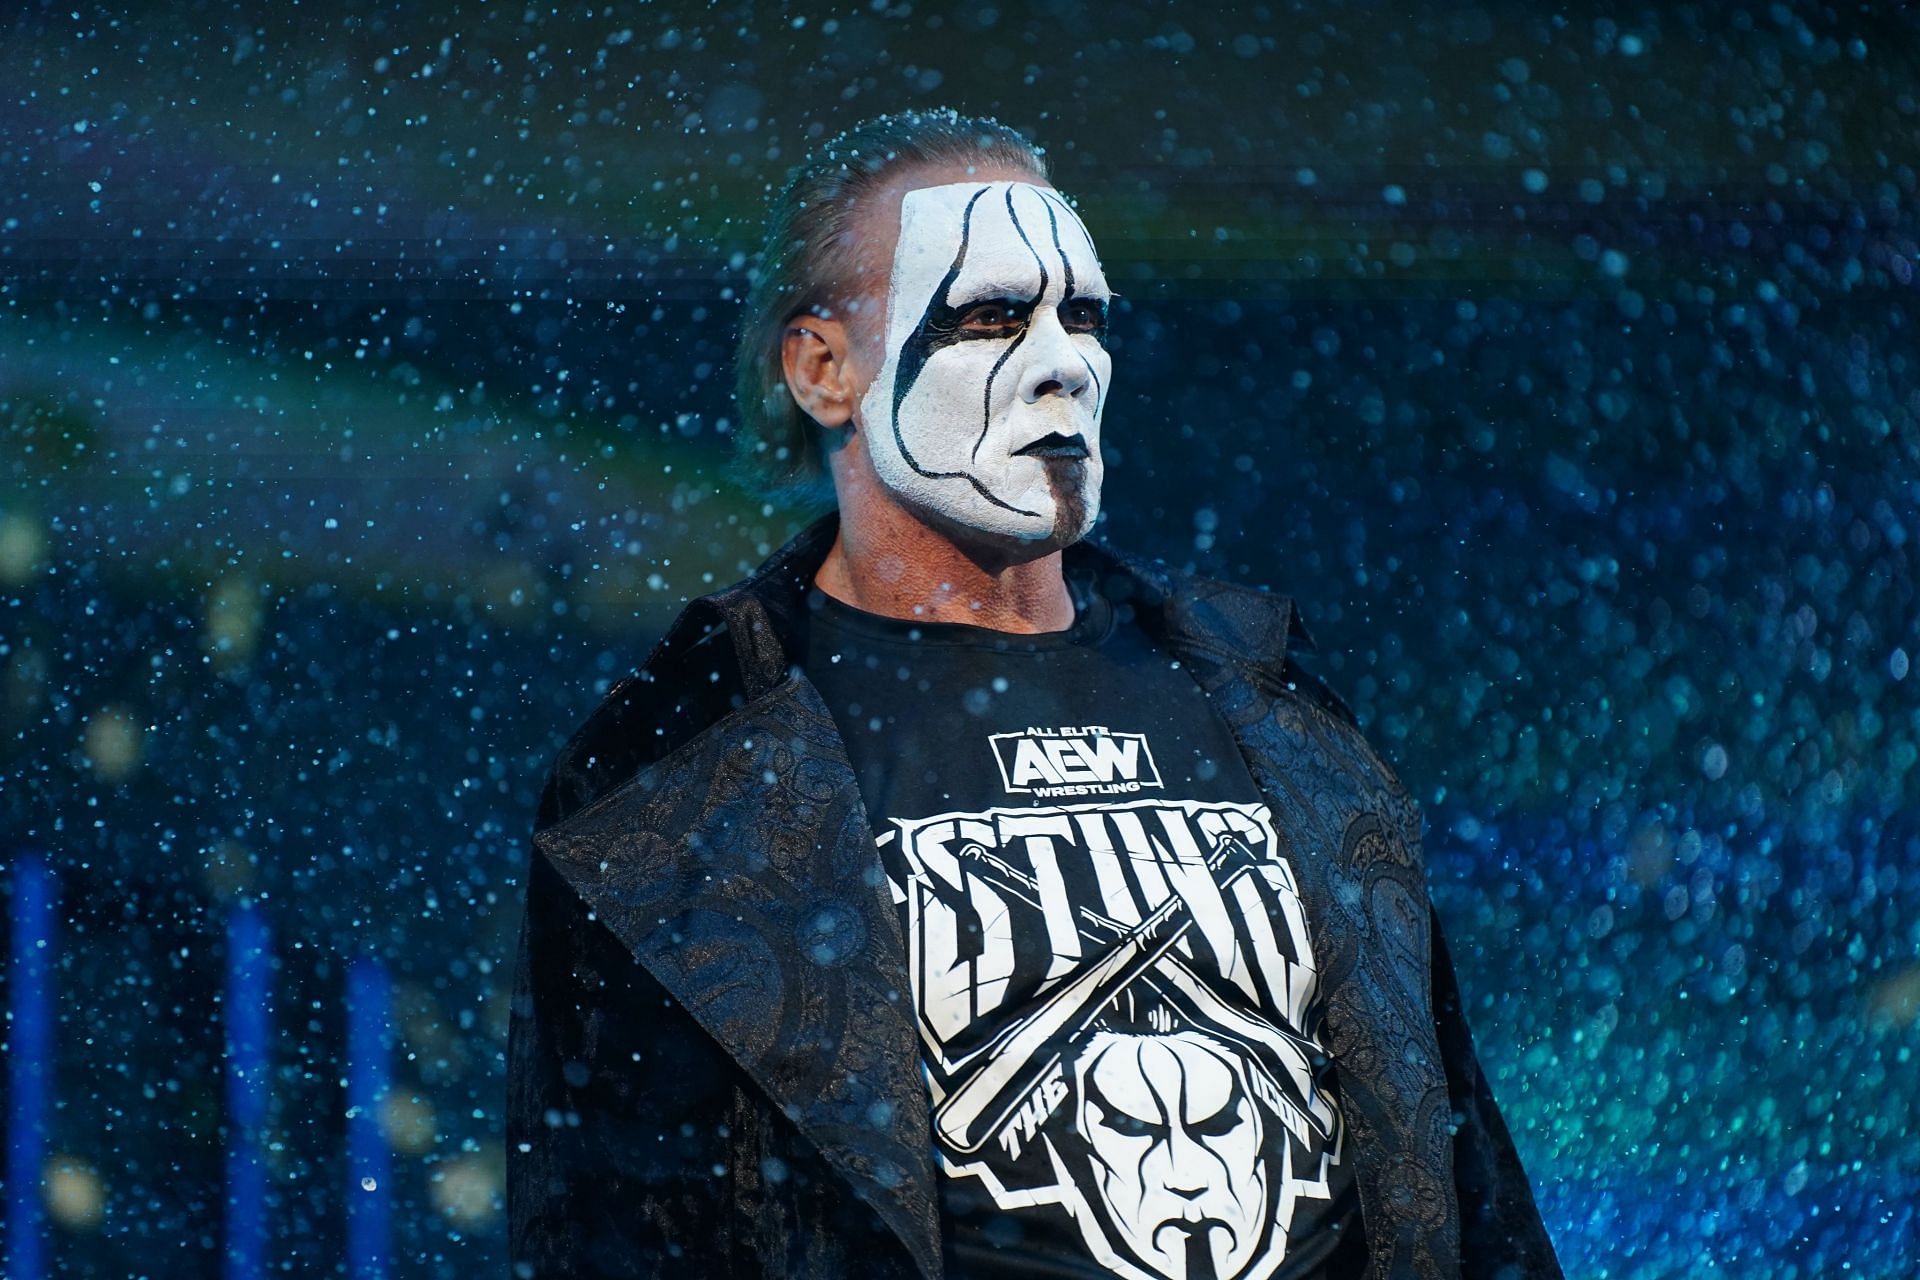 Sting debuted in AEW in December 2020